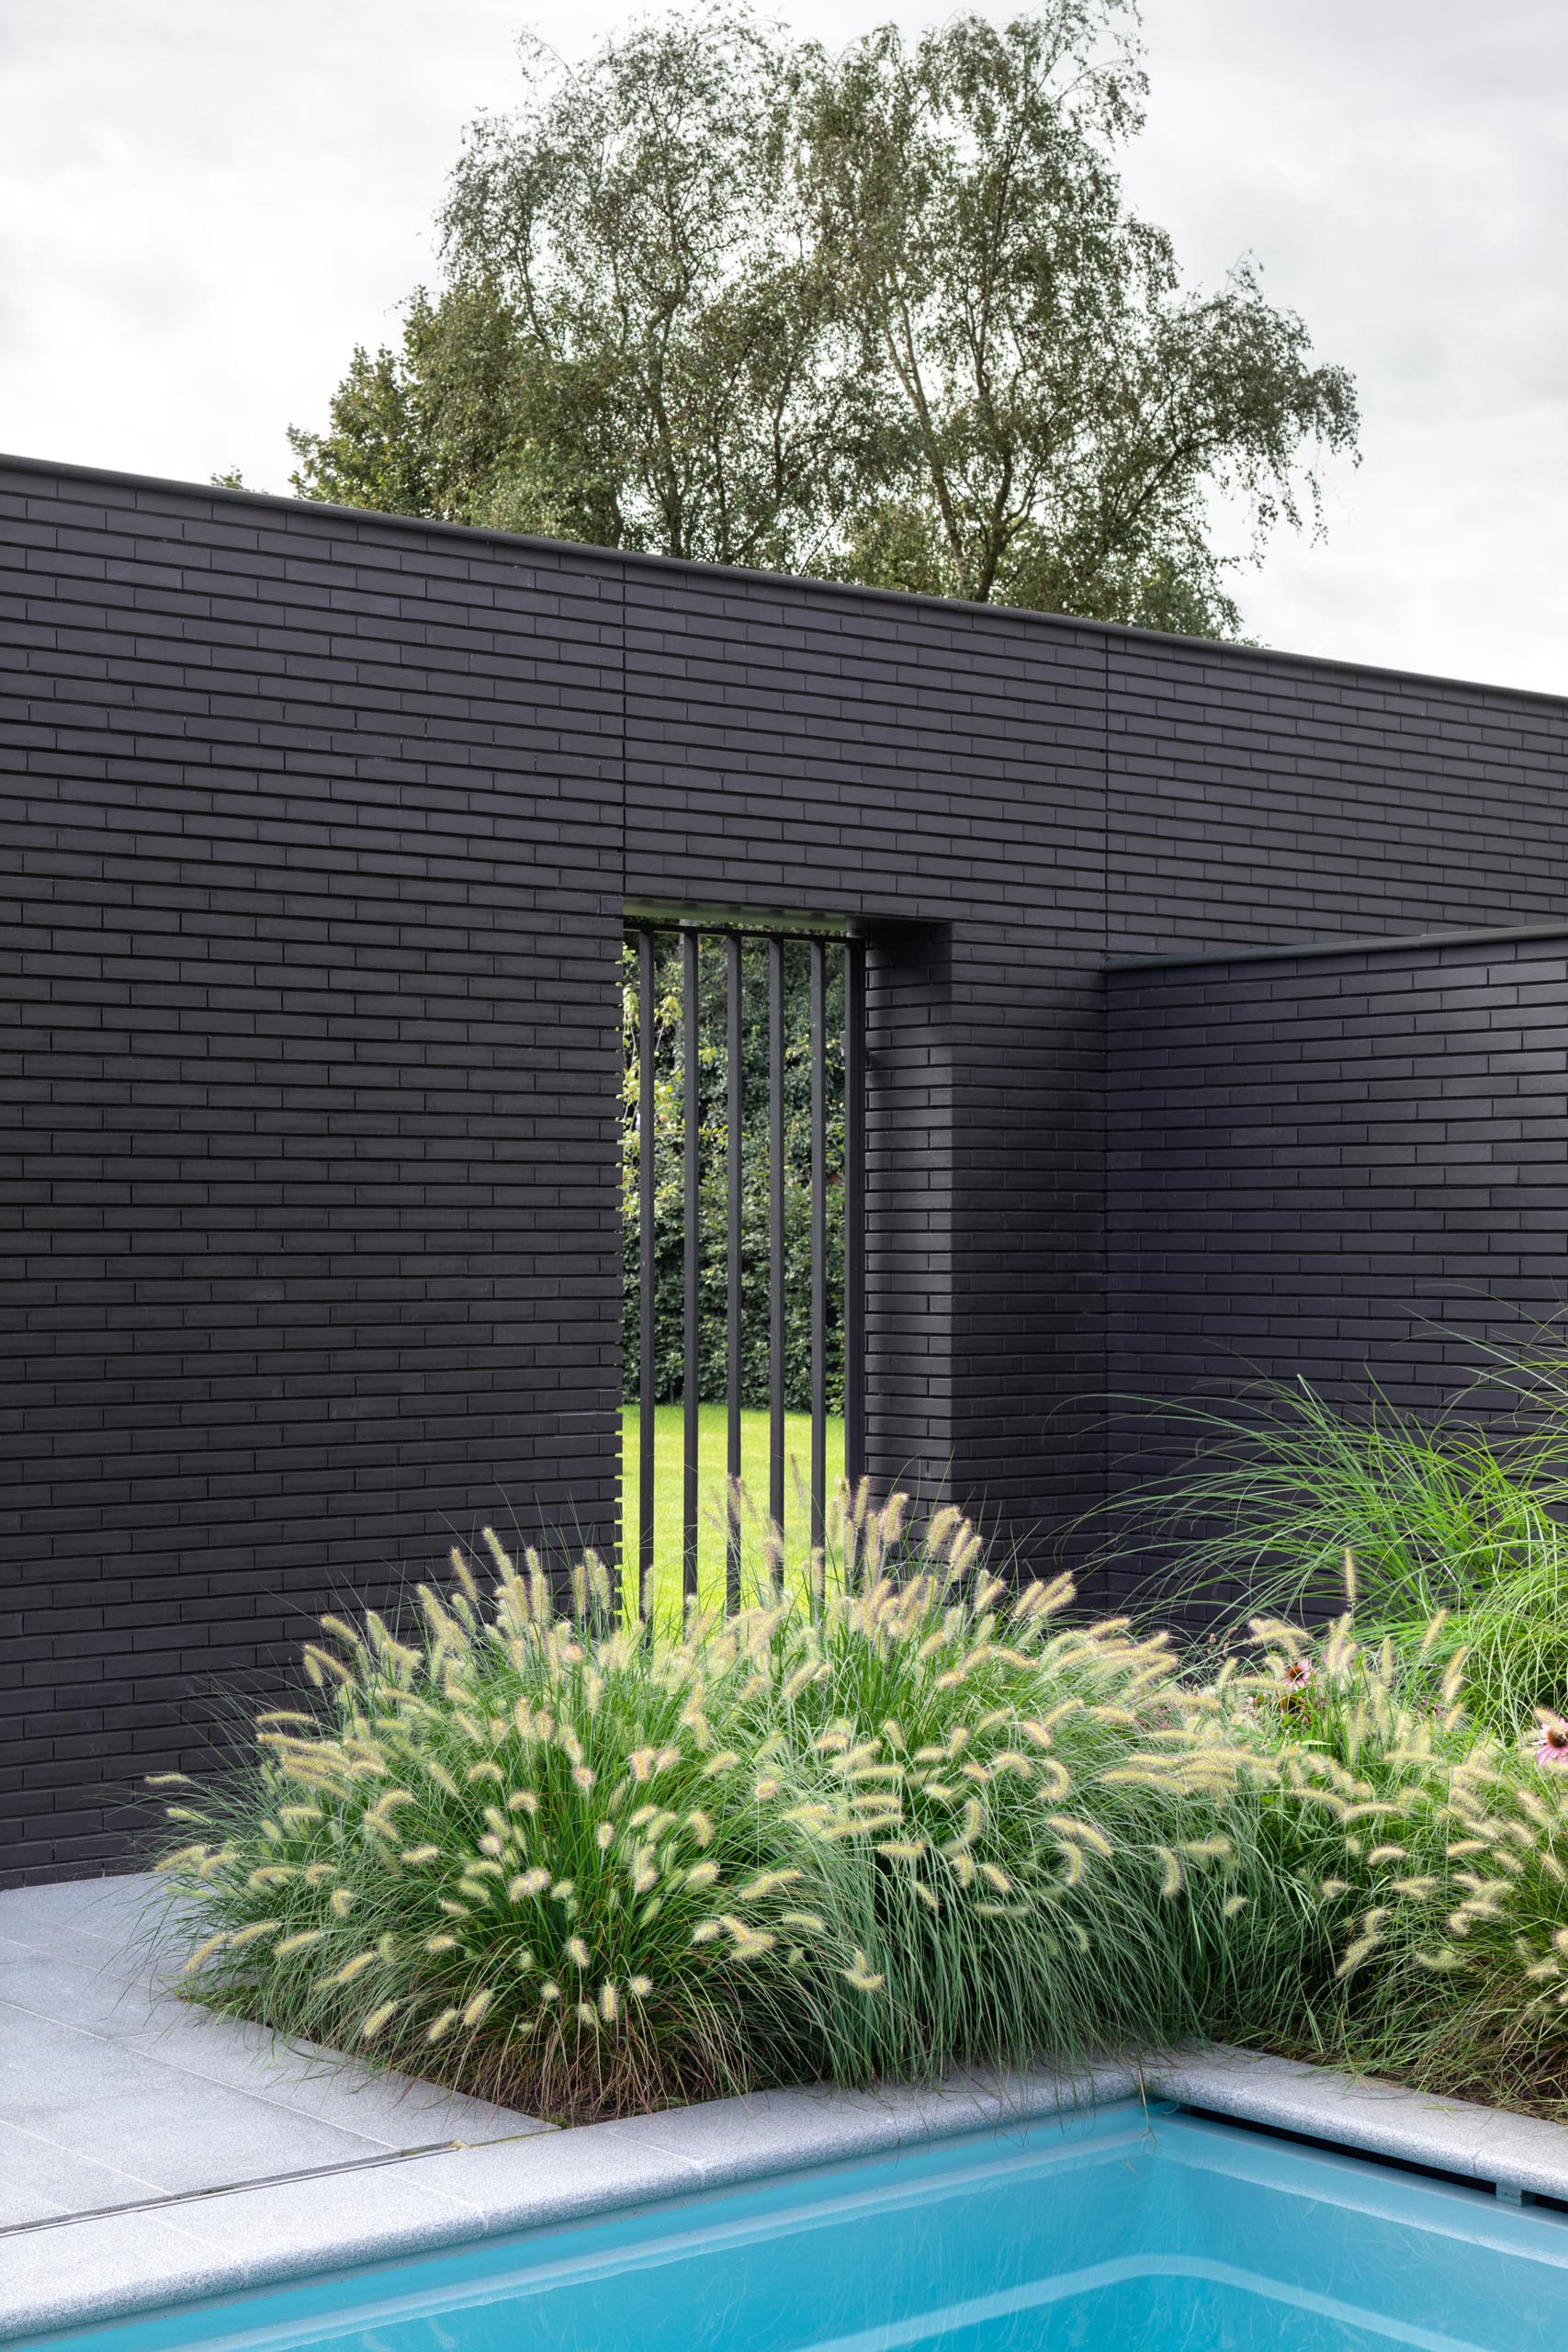 A black brick home exterior with lush gardens and a swimming pool.